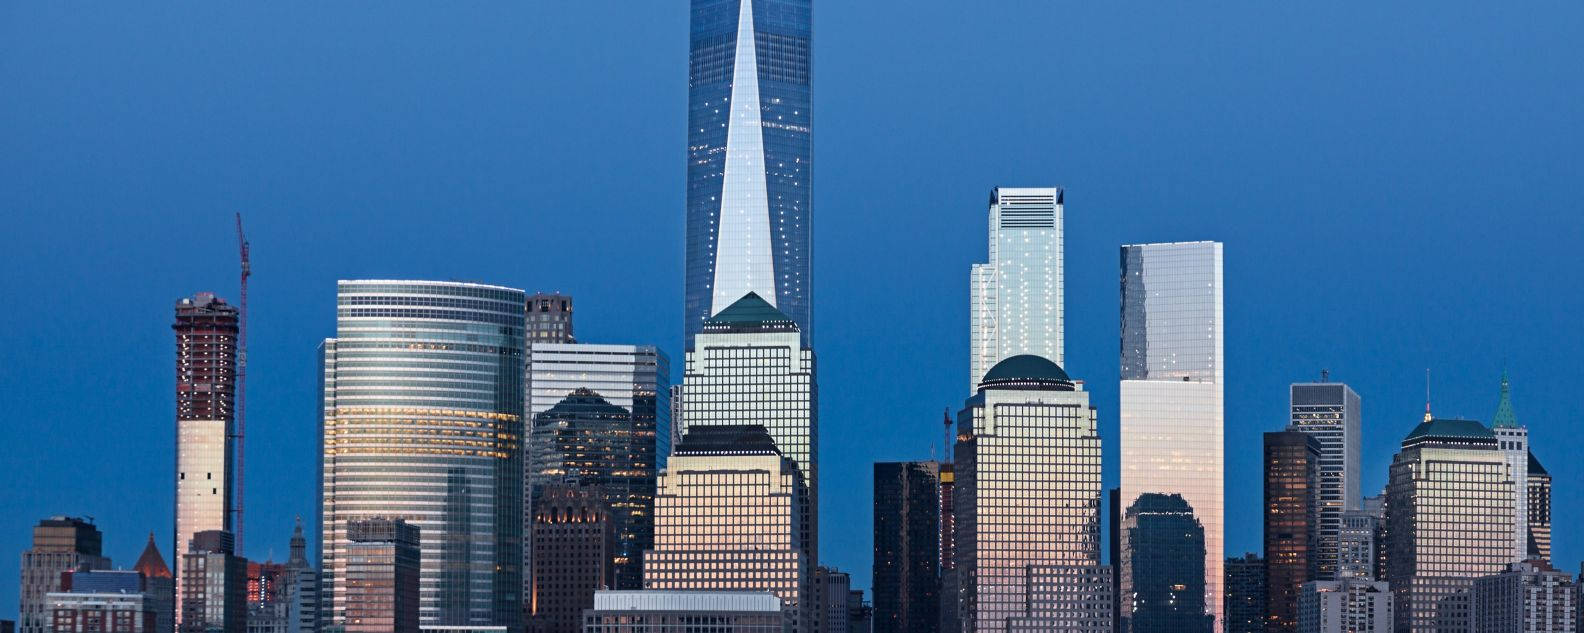 United States One World Trade Center With Buildings Background